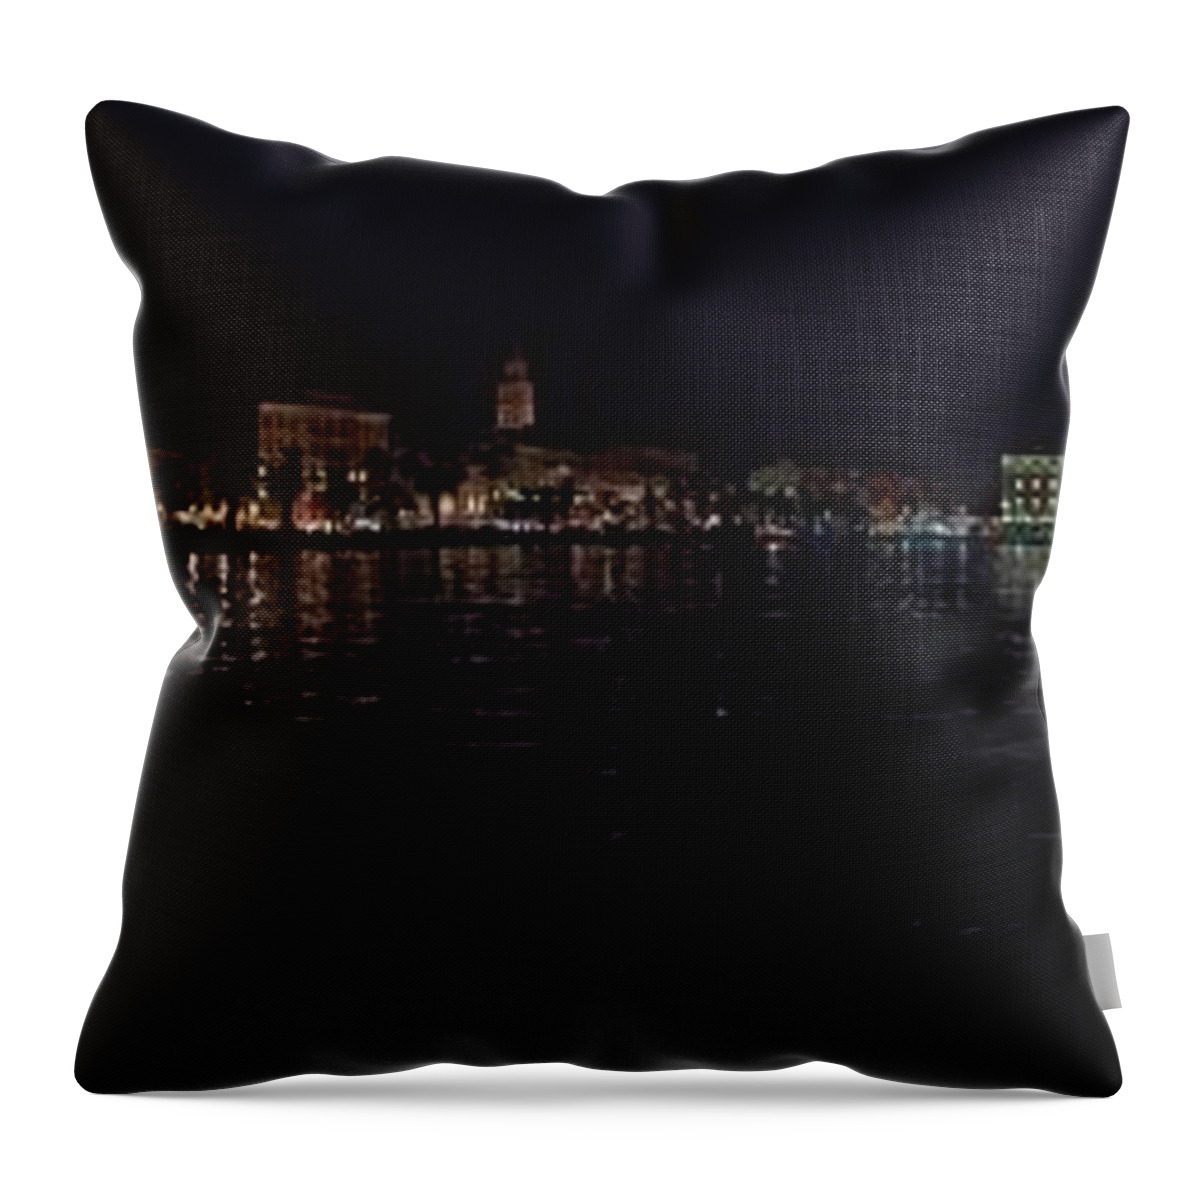 2012 Throw Pillow featuring the photograph Split Old town by night by Jouko Lehto